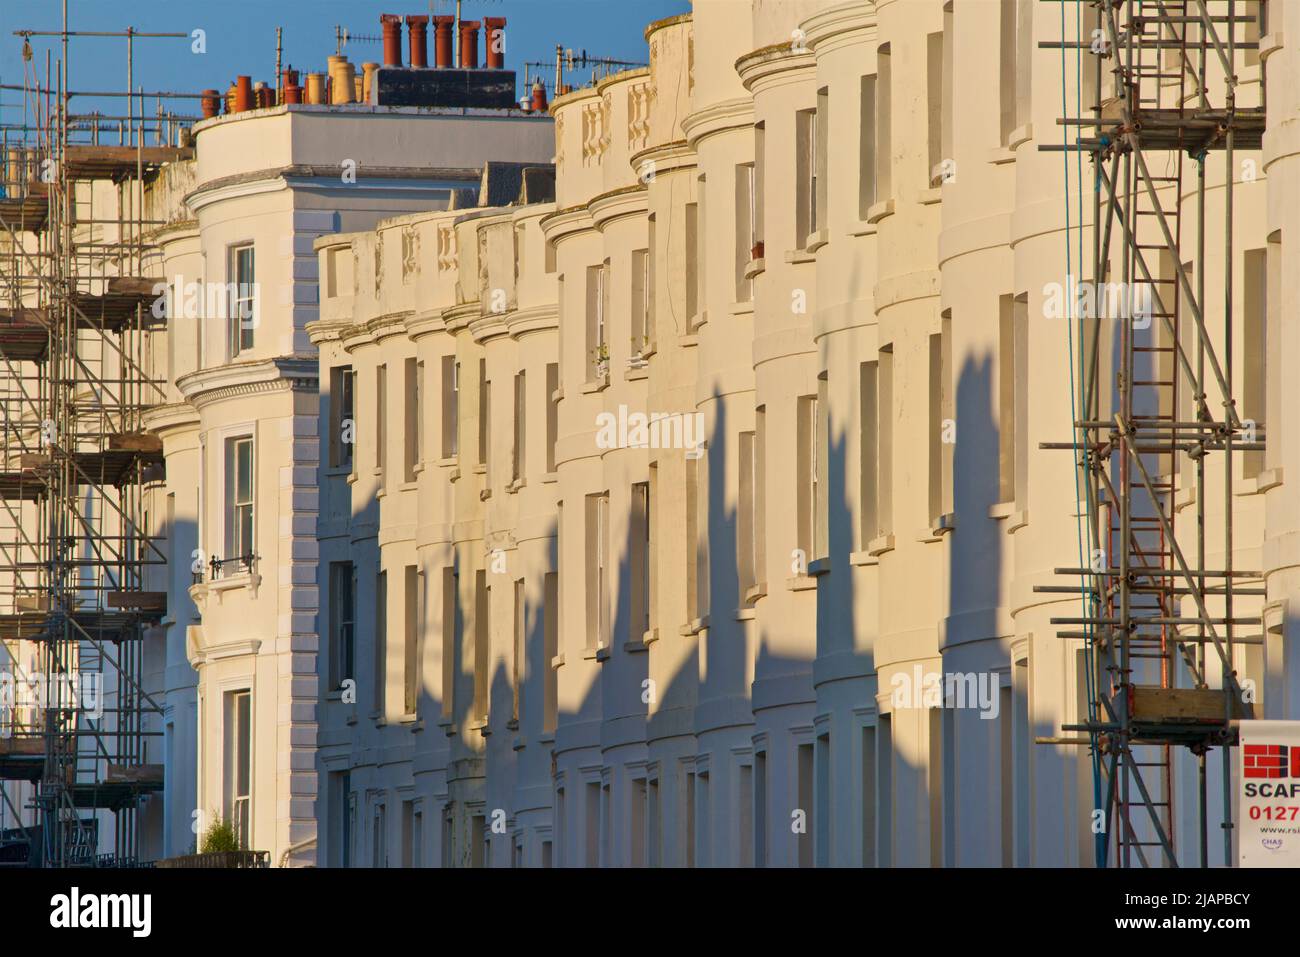 Compressed perspective of regency architecture of Lansdown Place, Hove, Brighton and Hove, East Sussex, England UK. Scaffoldfing and stucco-fronted facades in a residential street. Stock Photo